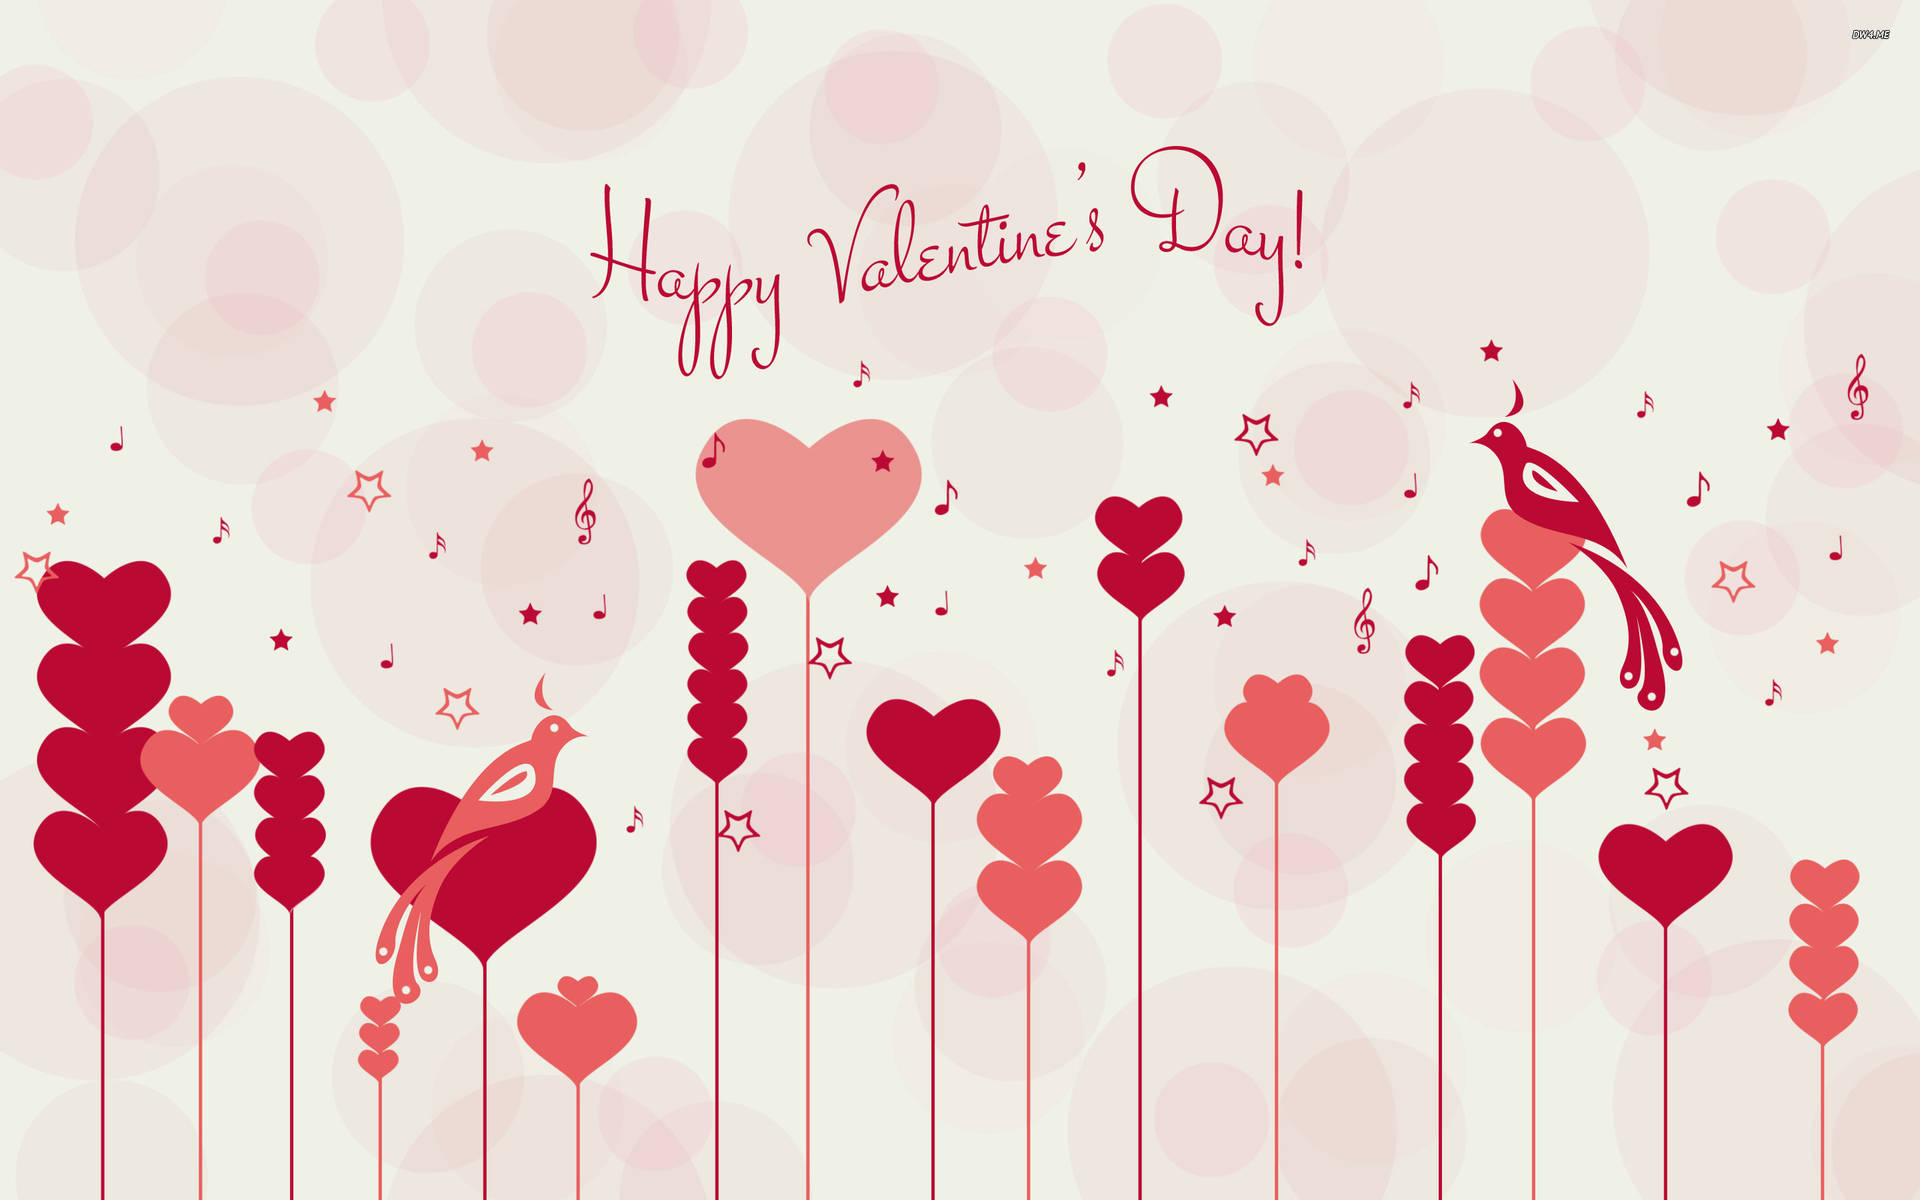 Happy Valentine's Day With Hearts And Lovebirds Wallpaper